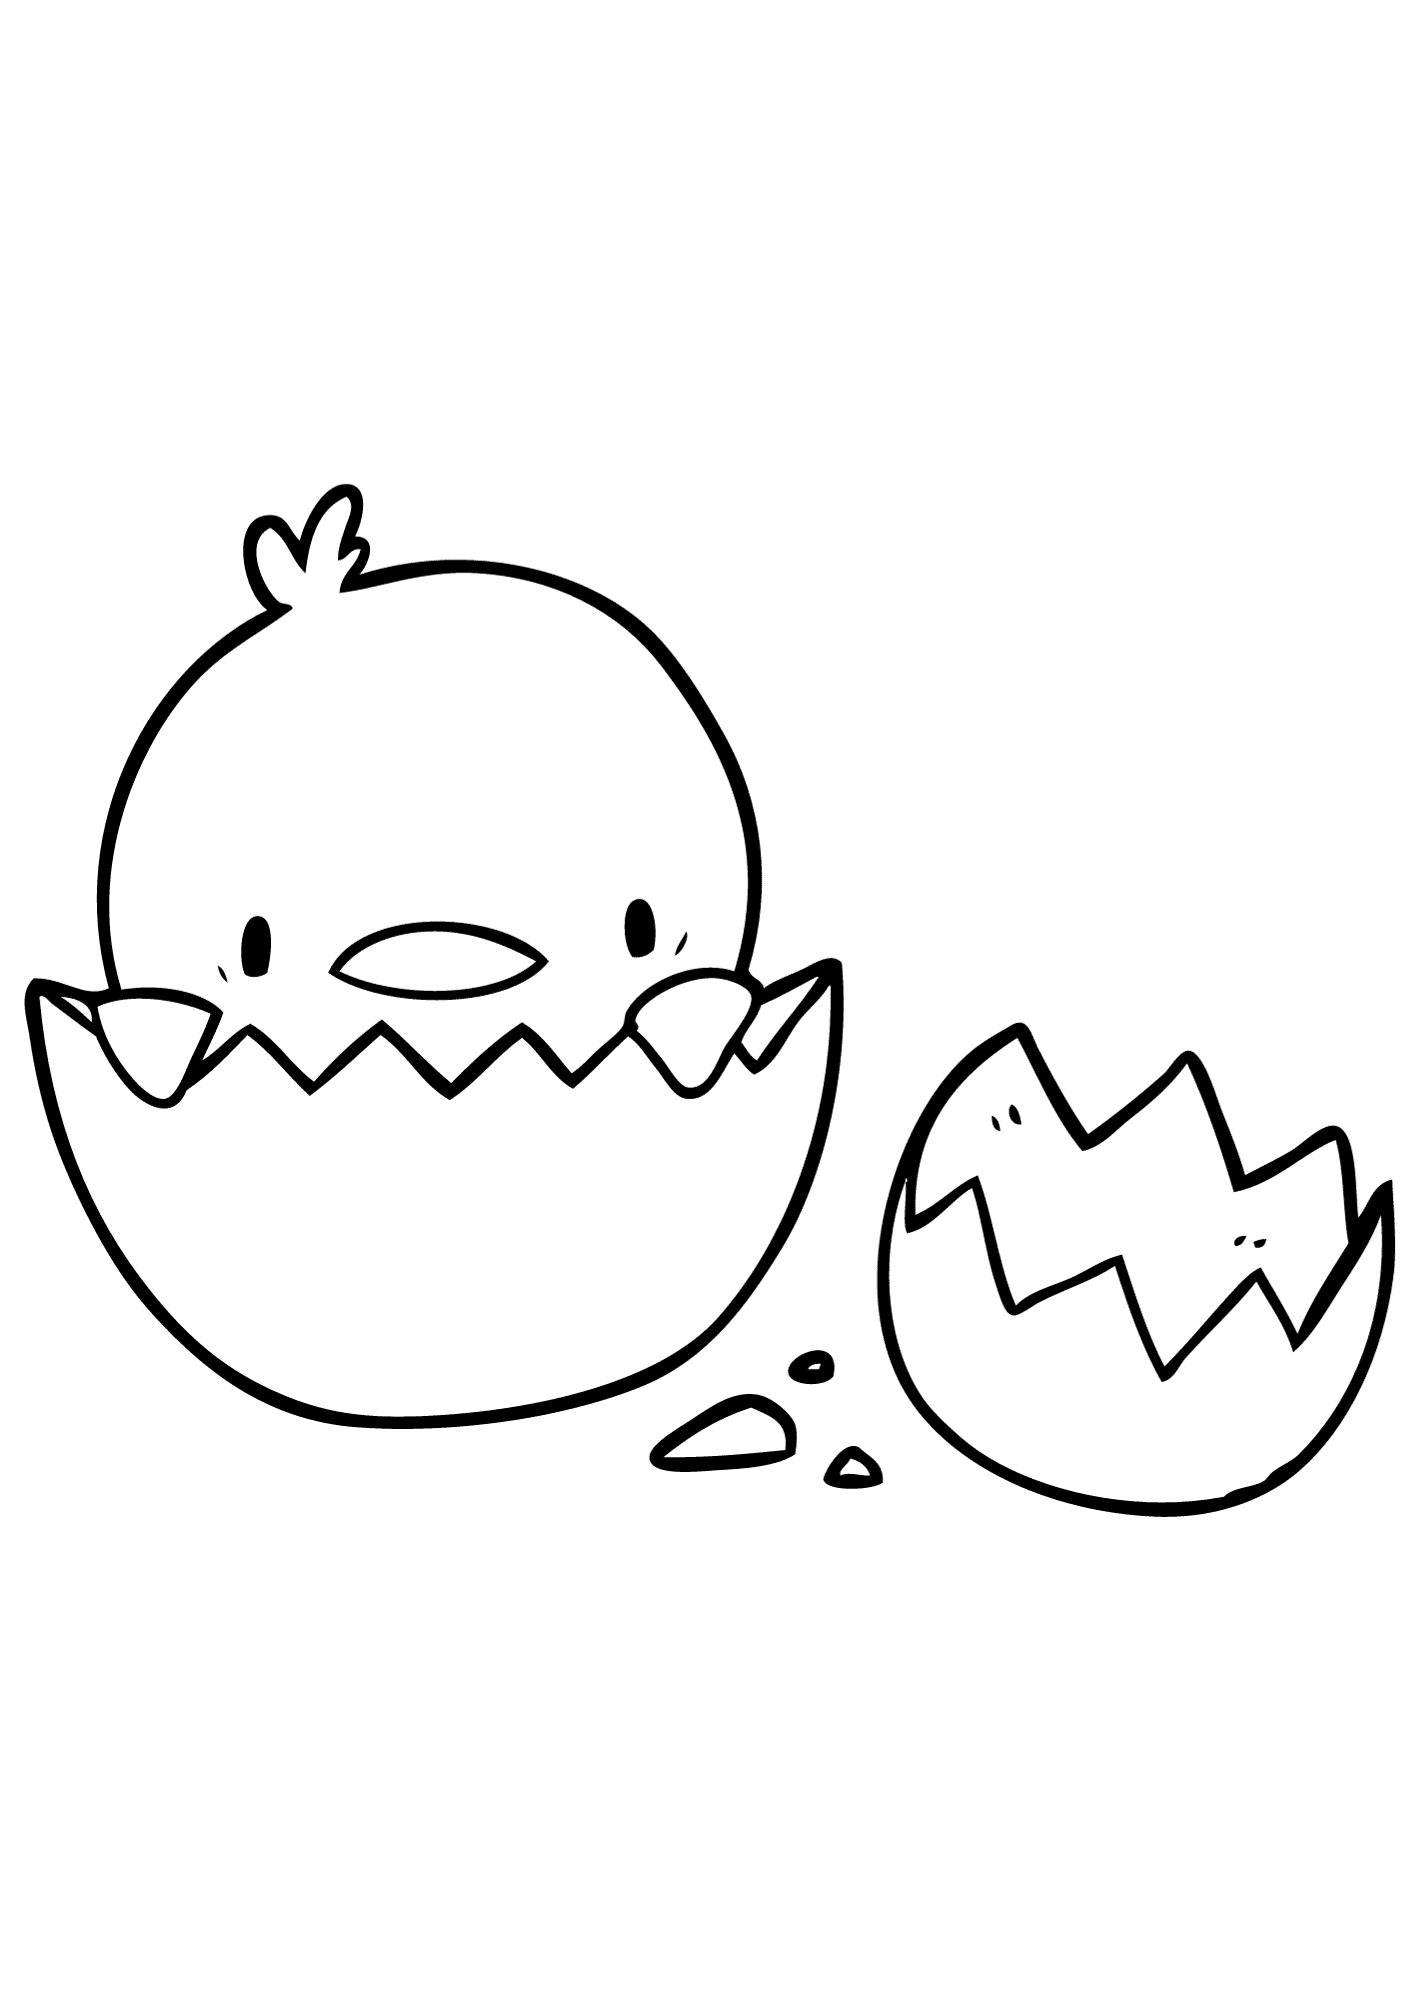 Chick Drawing Coloring Page